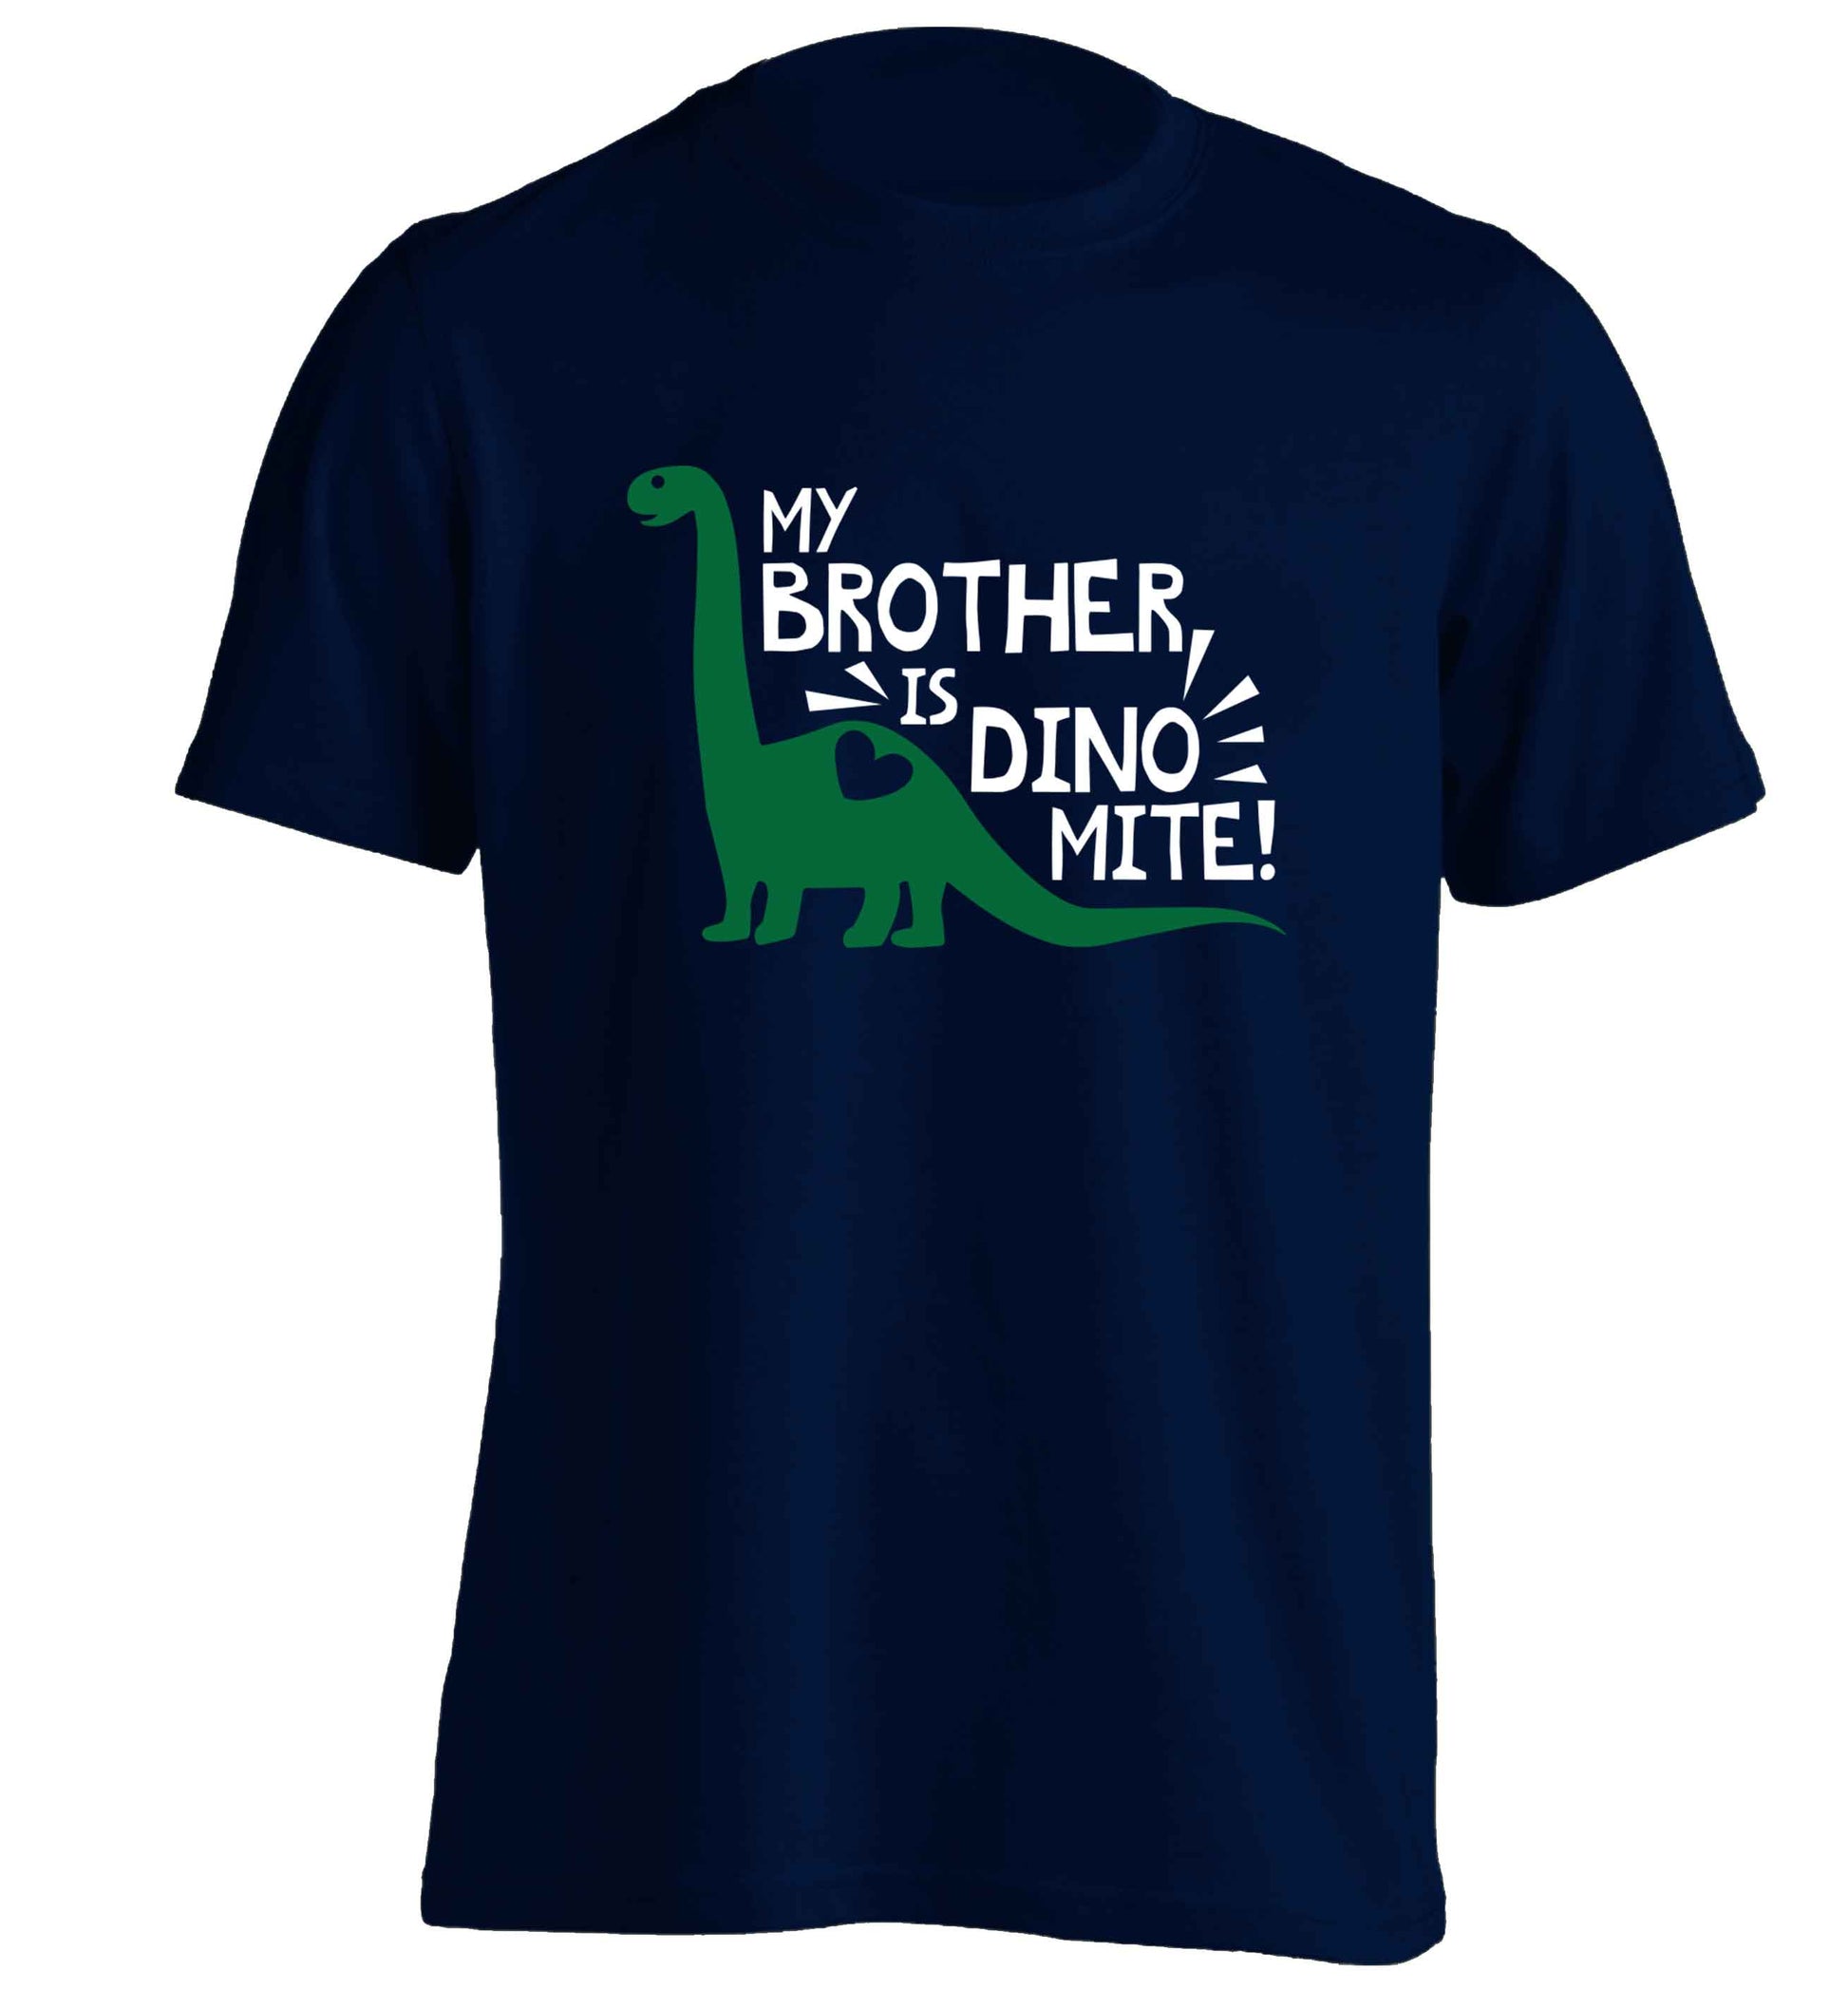 My brother is dinomite! adults unisex navy Tshirt 2XL